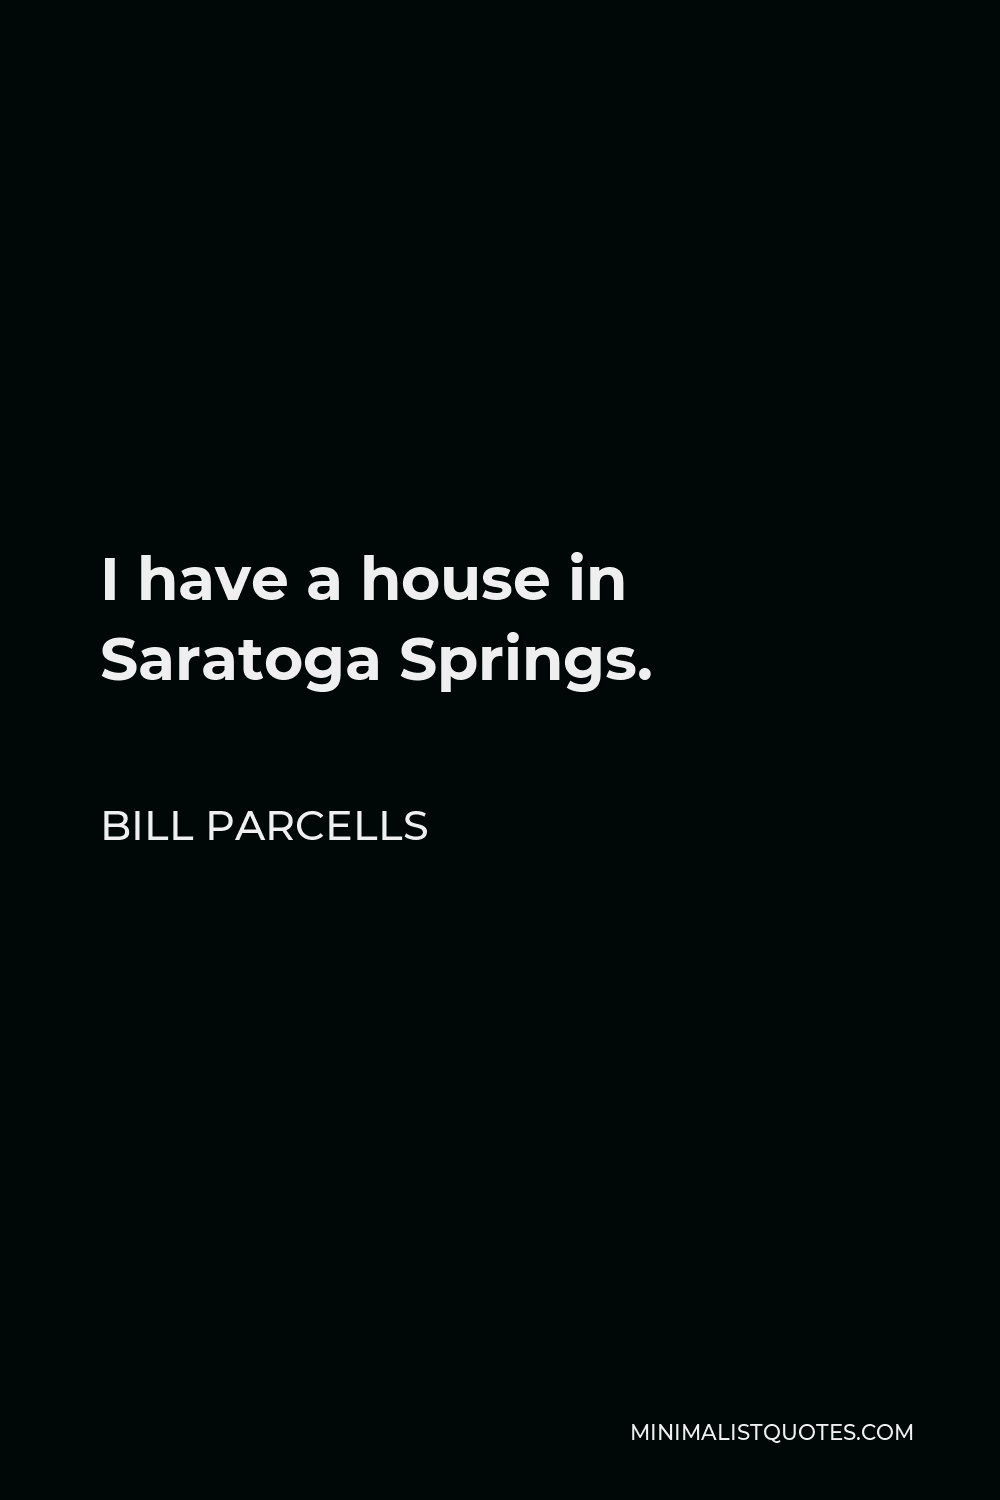 Bill Parcells Quote - I have a house in Saratoga Springs.